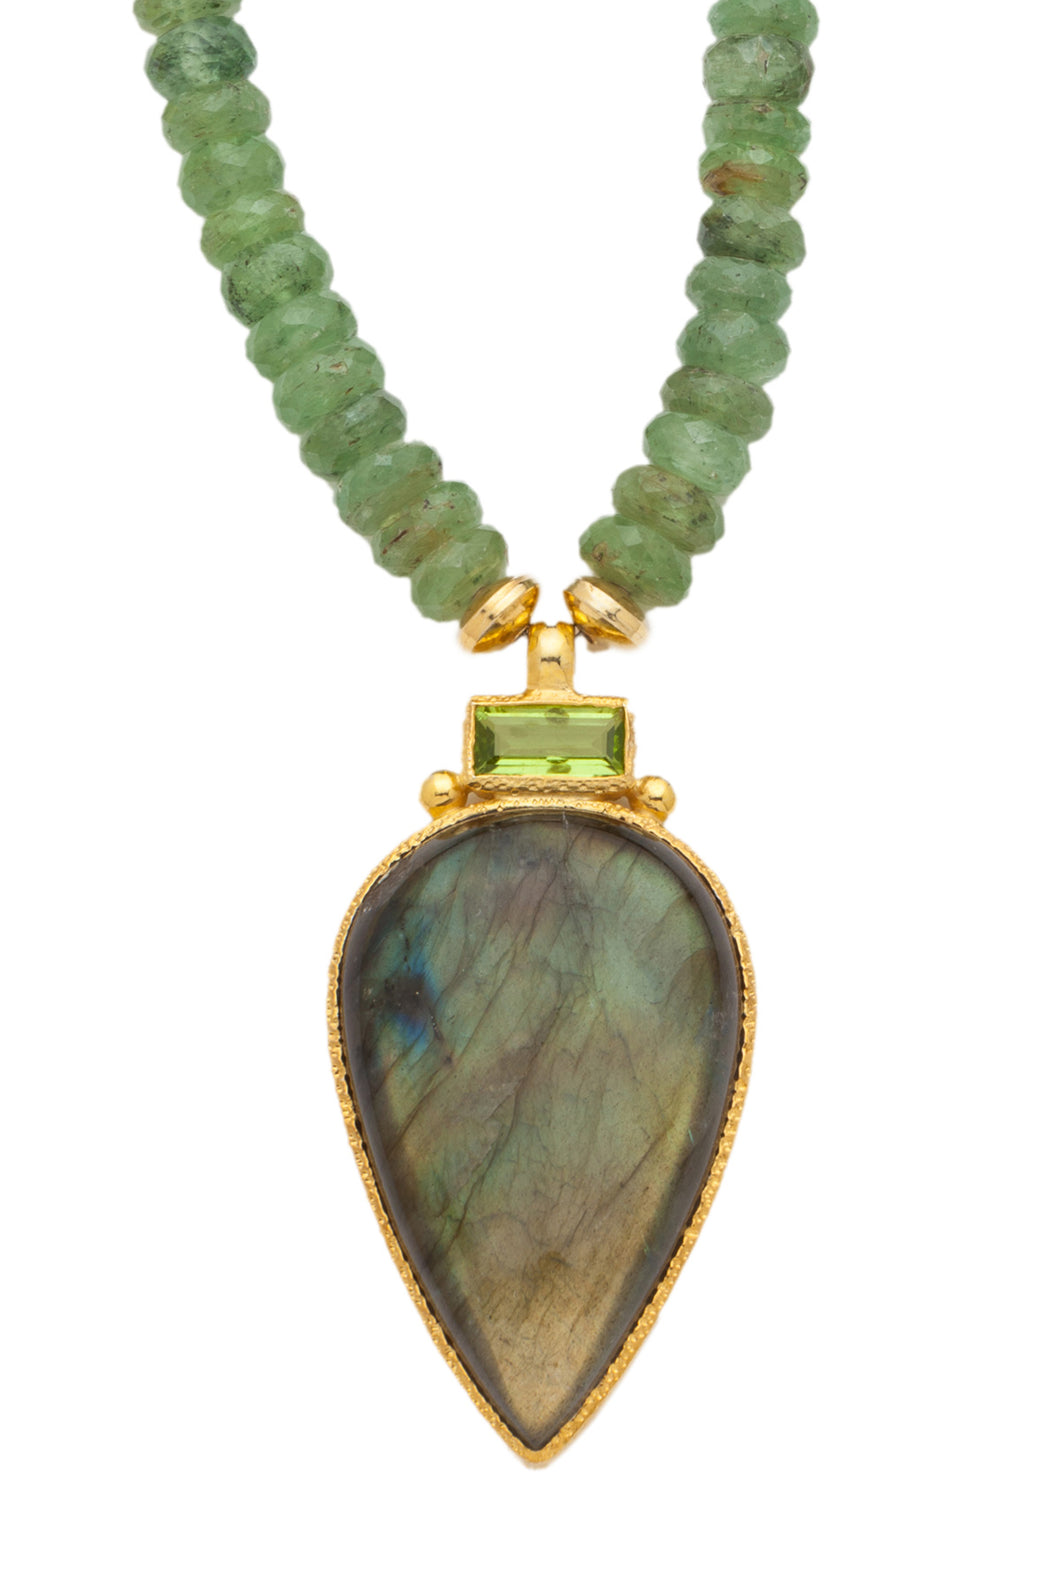 ONE OF A KIND Green Kyanite Necklace with Peridot and Labradorite Pendant set in 24kt gold vermeil  NF301-GKPL